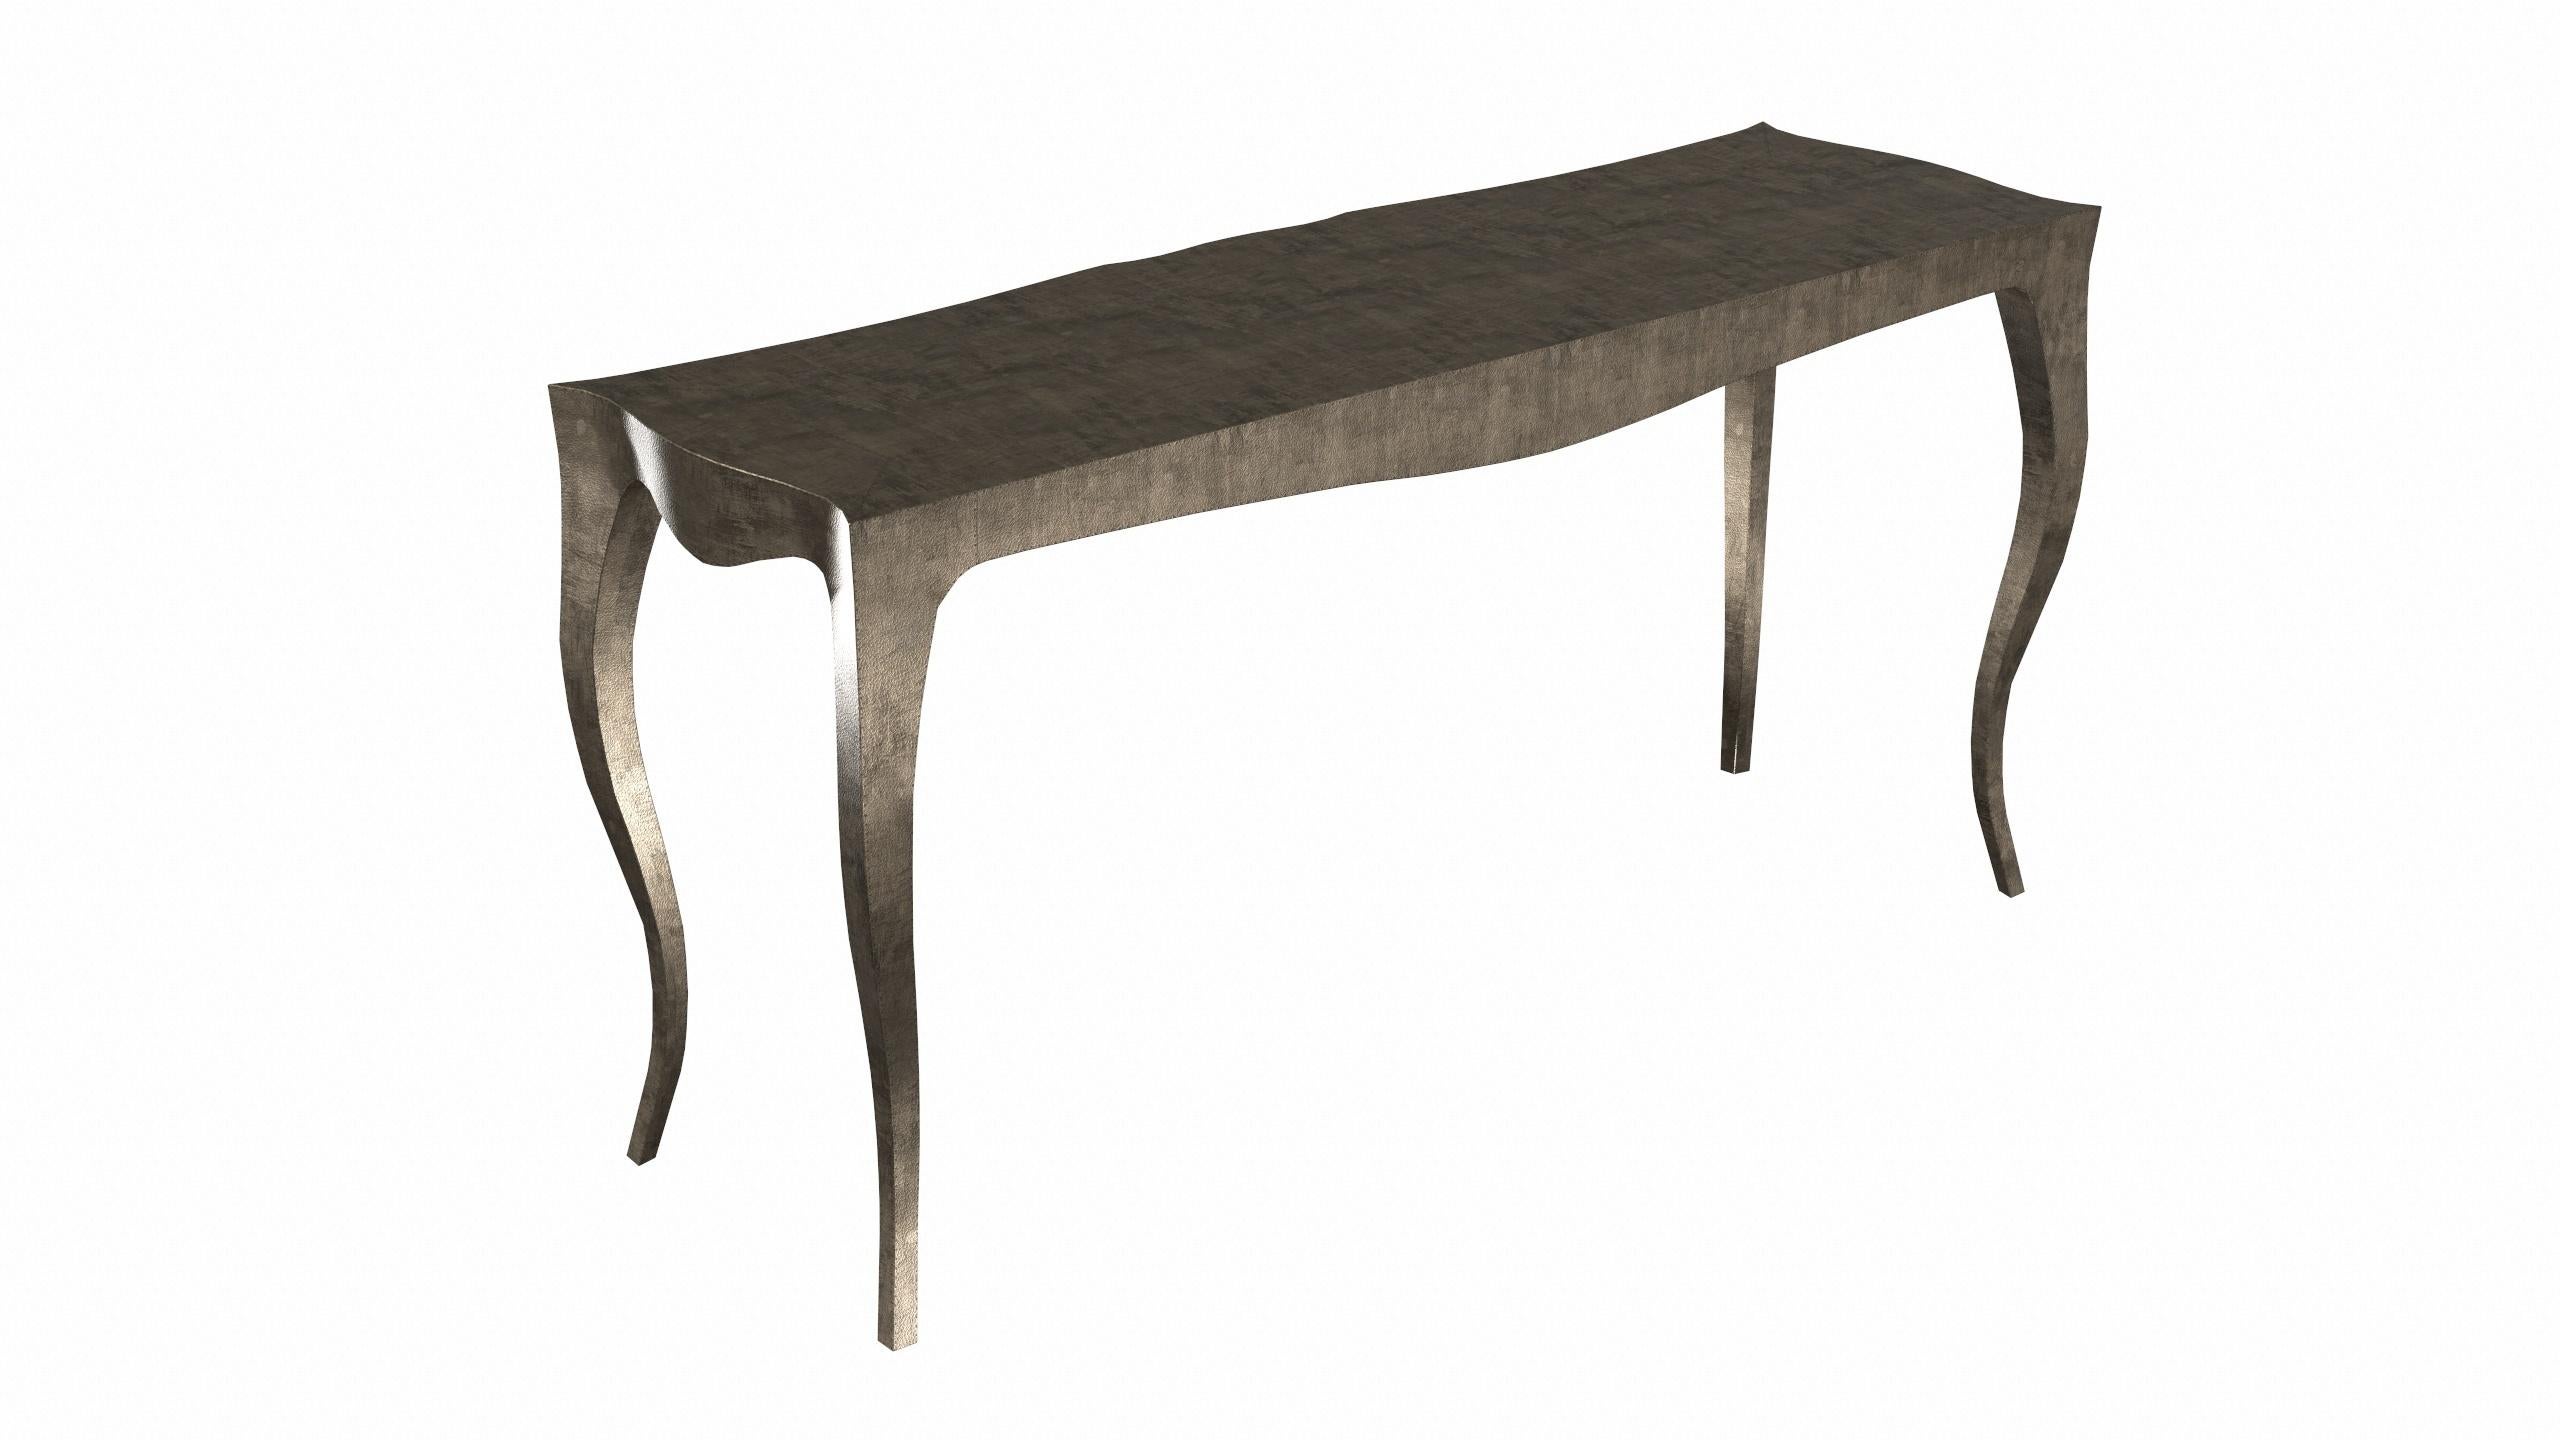 Other Louise Console Art Deco Industrial and Work Tables Fine Hammered Antique Bronze For Sale